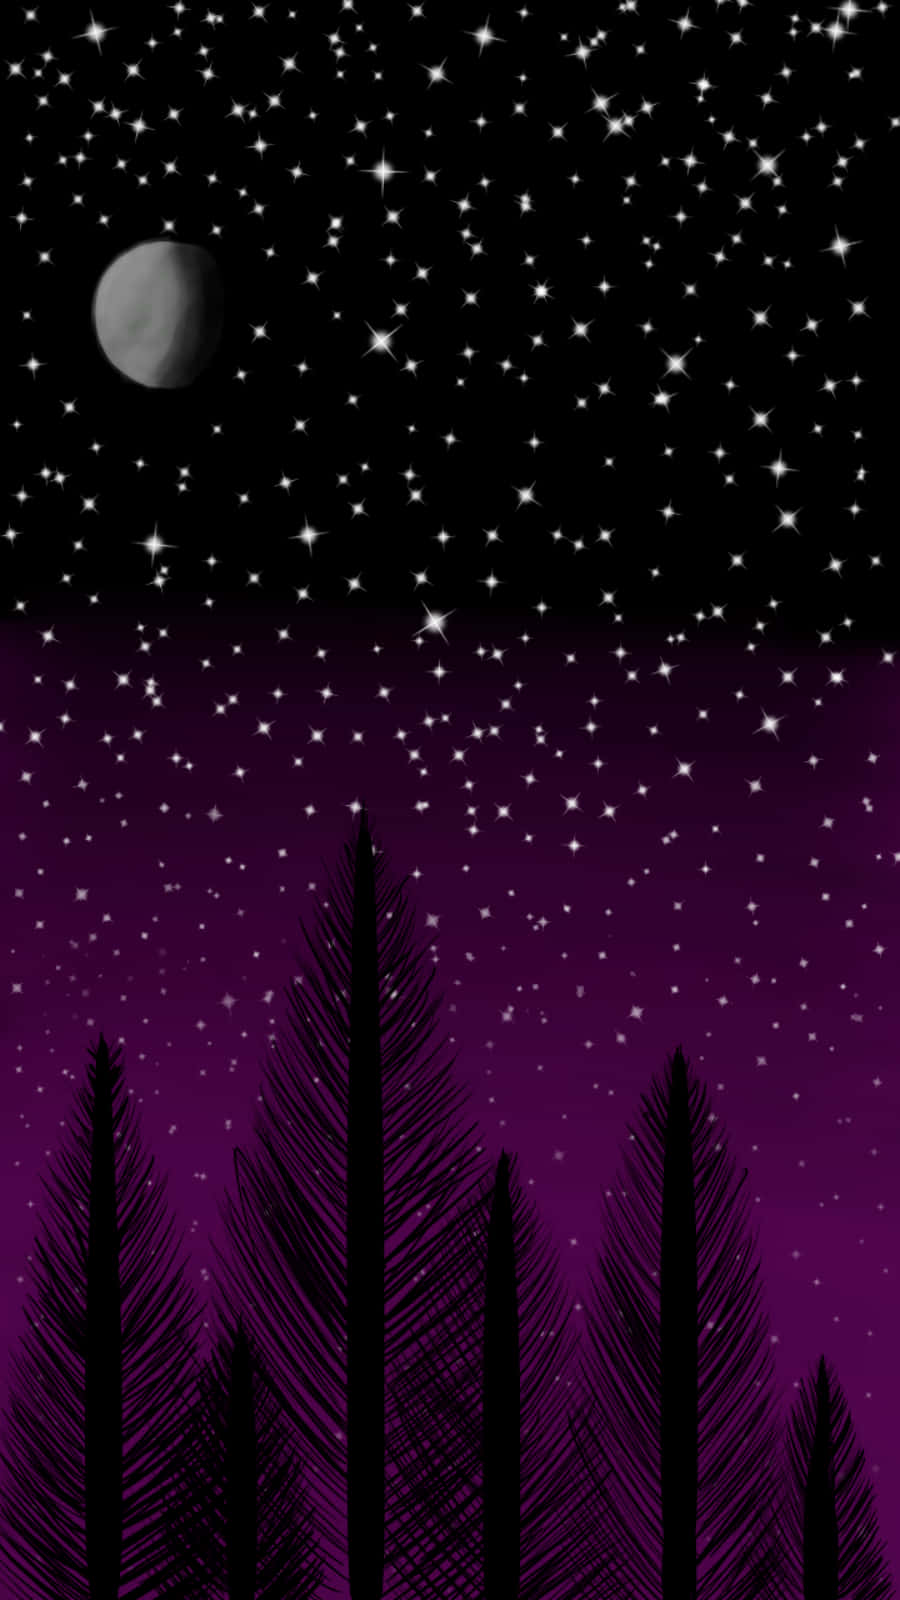 Asexual Night Sky With Tree Silhouette Wallpaper